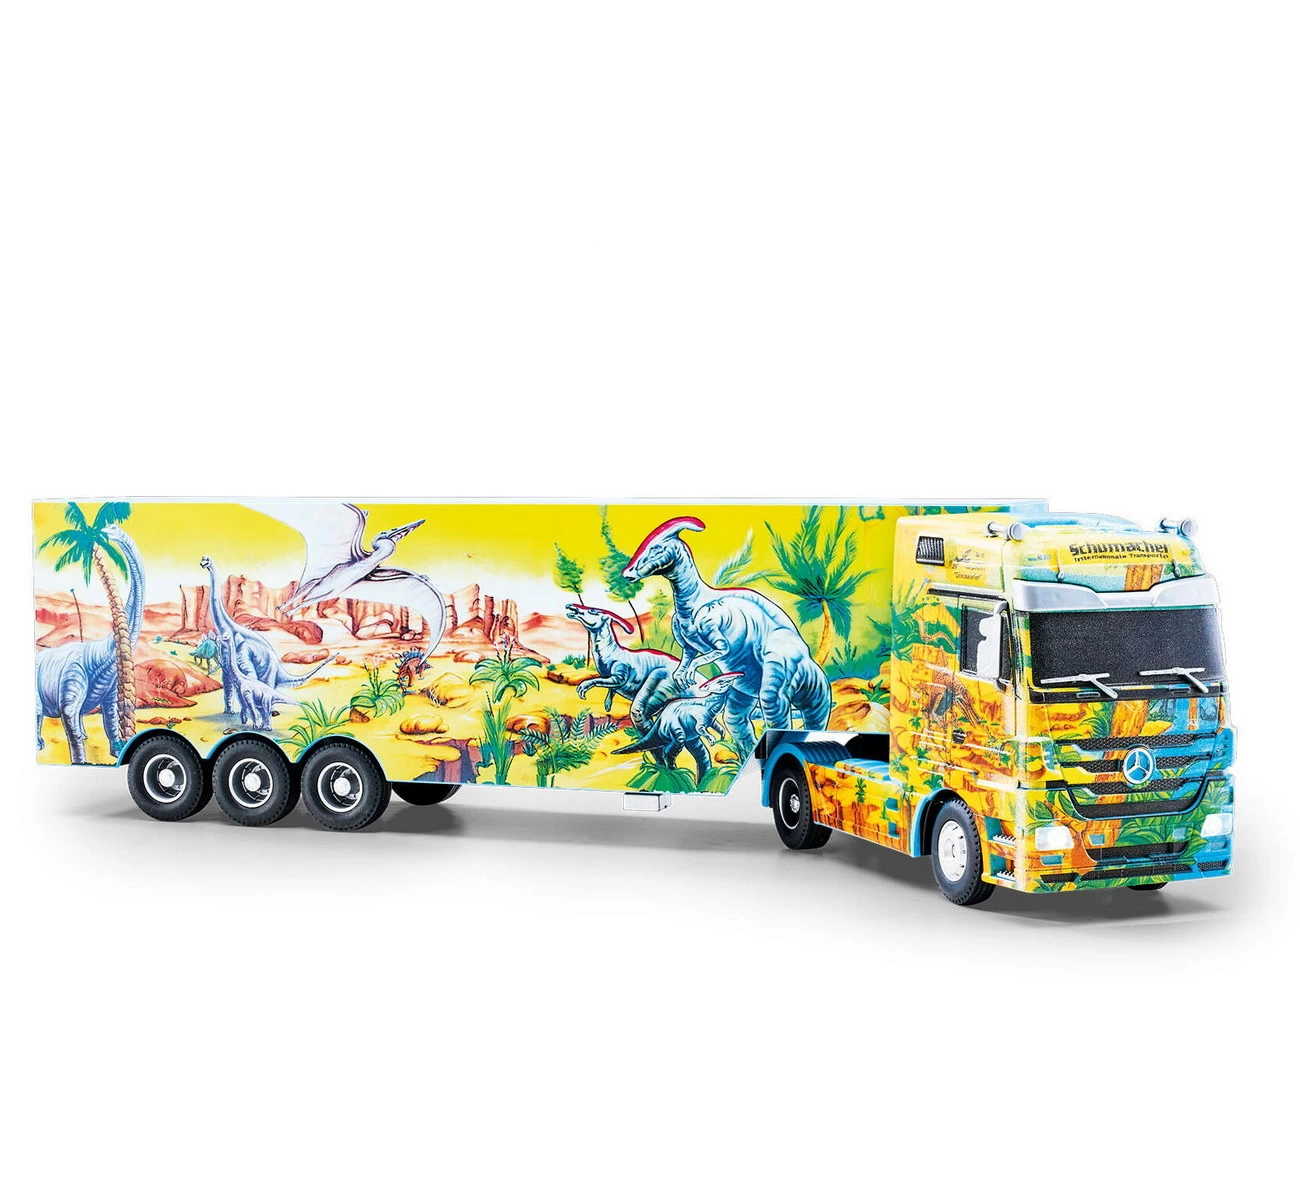 Revell Control 24534 - RC Show Truck Mercedes Benz Actros Dino Express - RC Auto